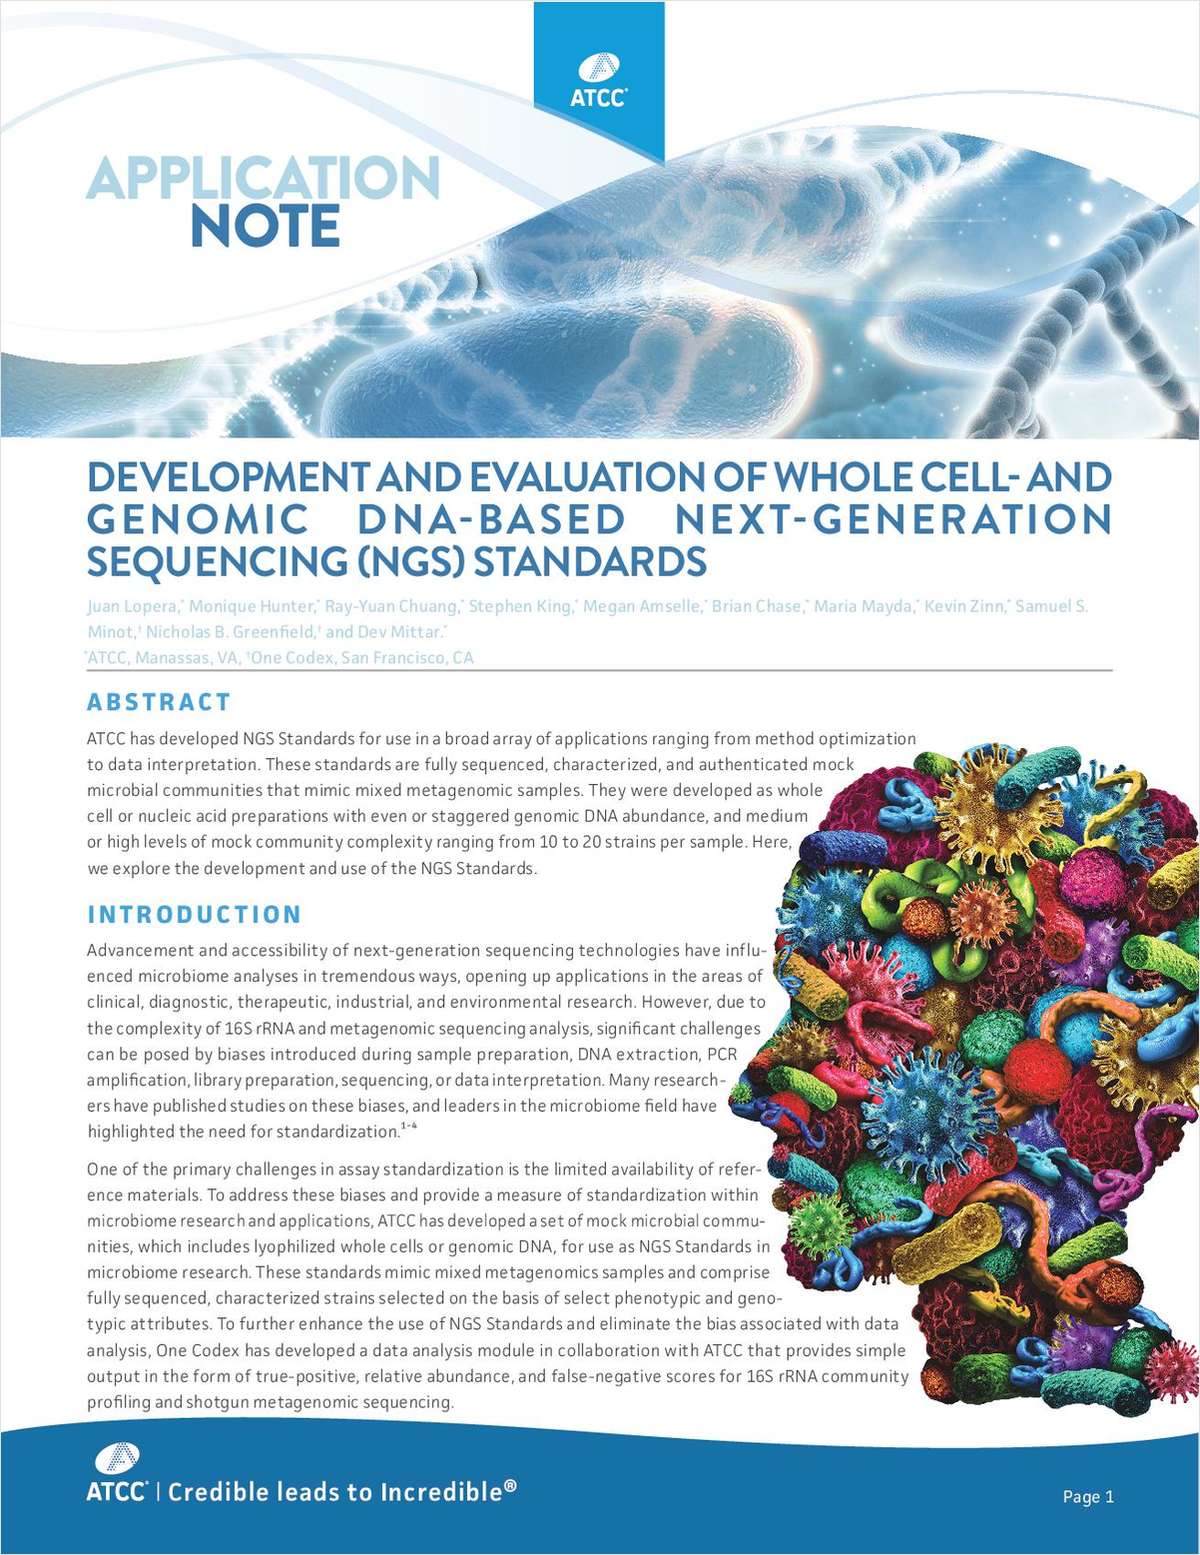 Development and Evaluation of Whole-Cell and Genomic DNA-Based Next-Generation Sequencing Standards